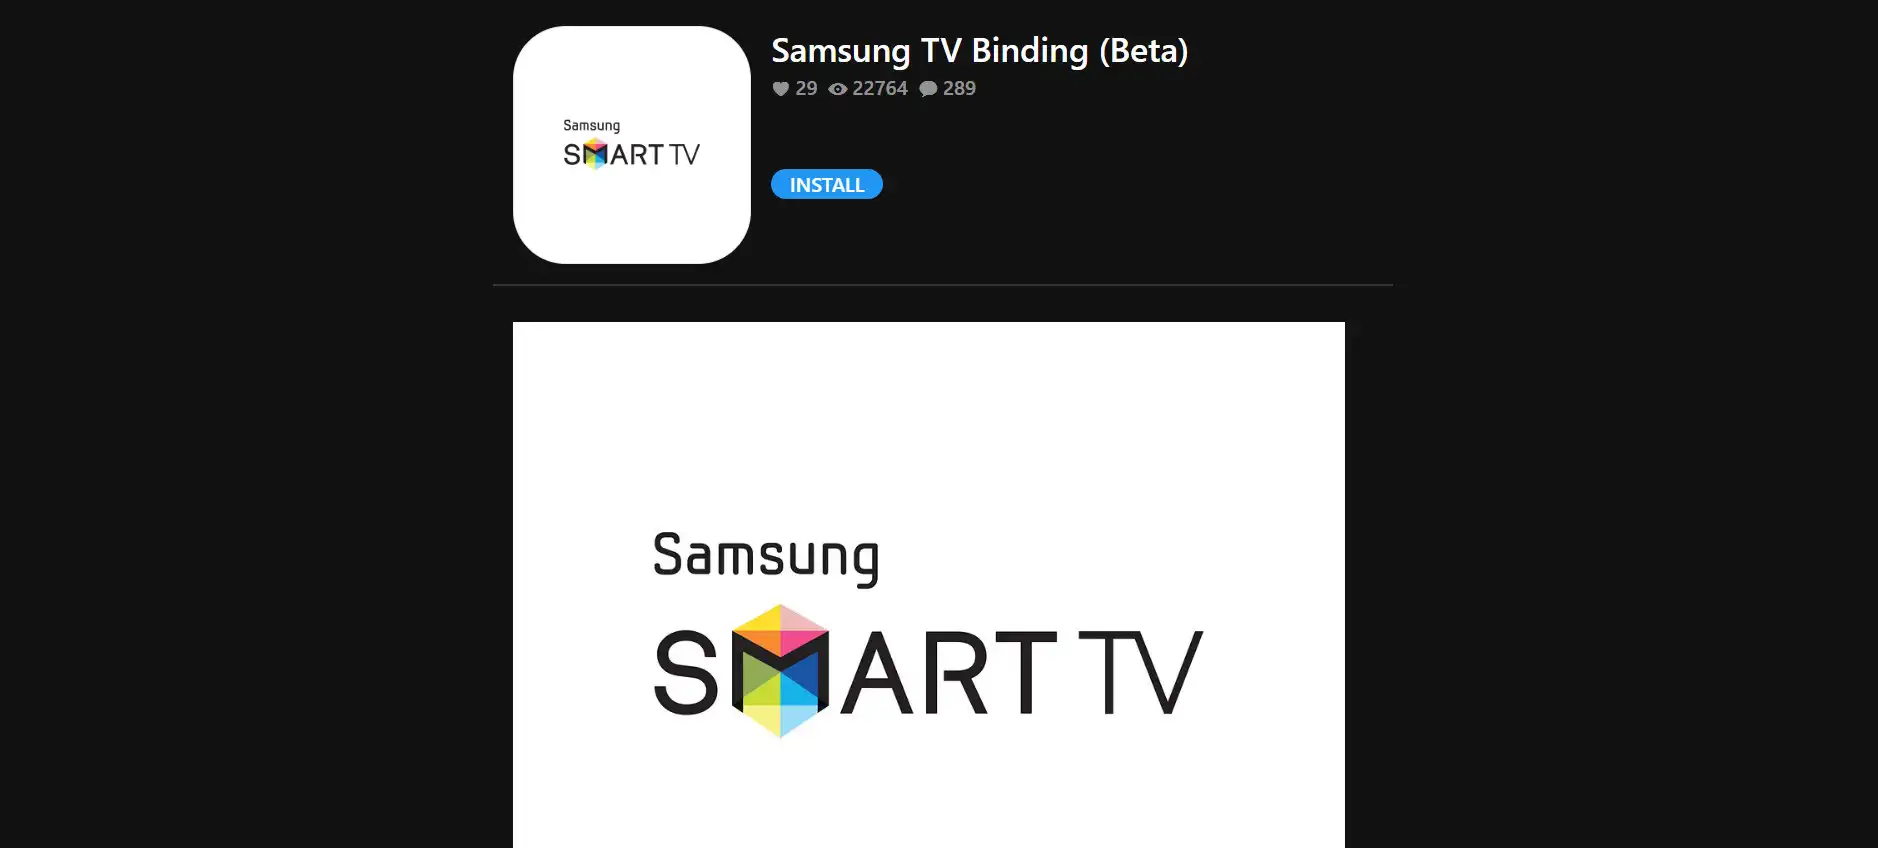 OpenHAB 4 - Provo il binding SAMSUNG TV BETA - Home Automation System